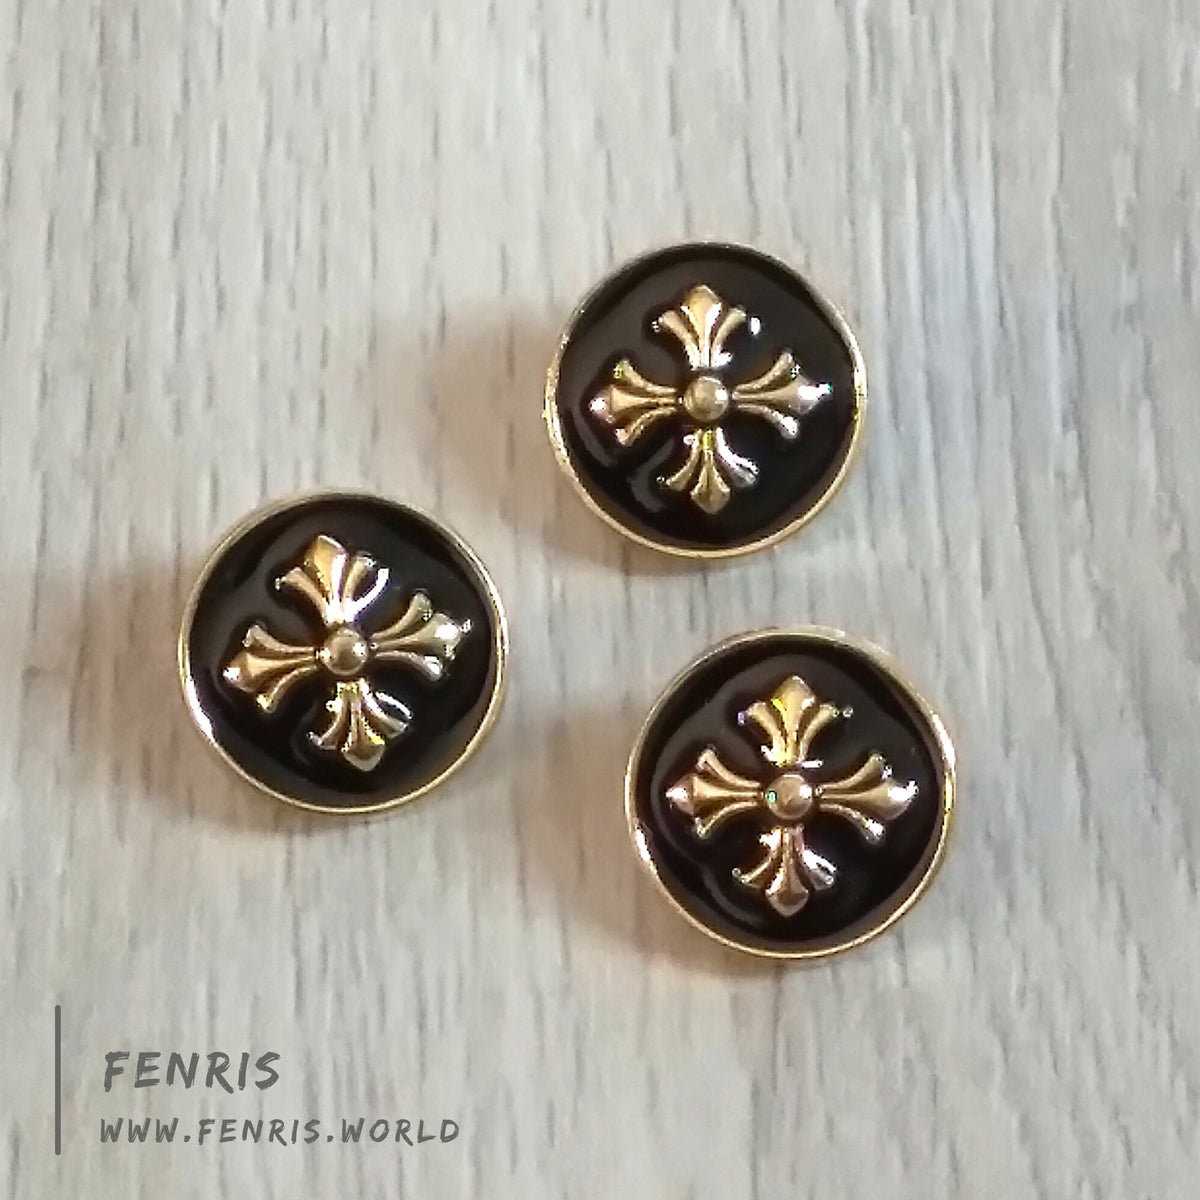 Set of 12 Gold and Black Enamel Buttons, 24 Line